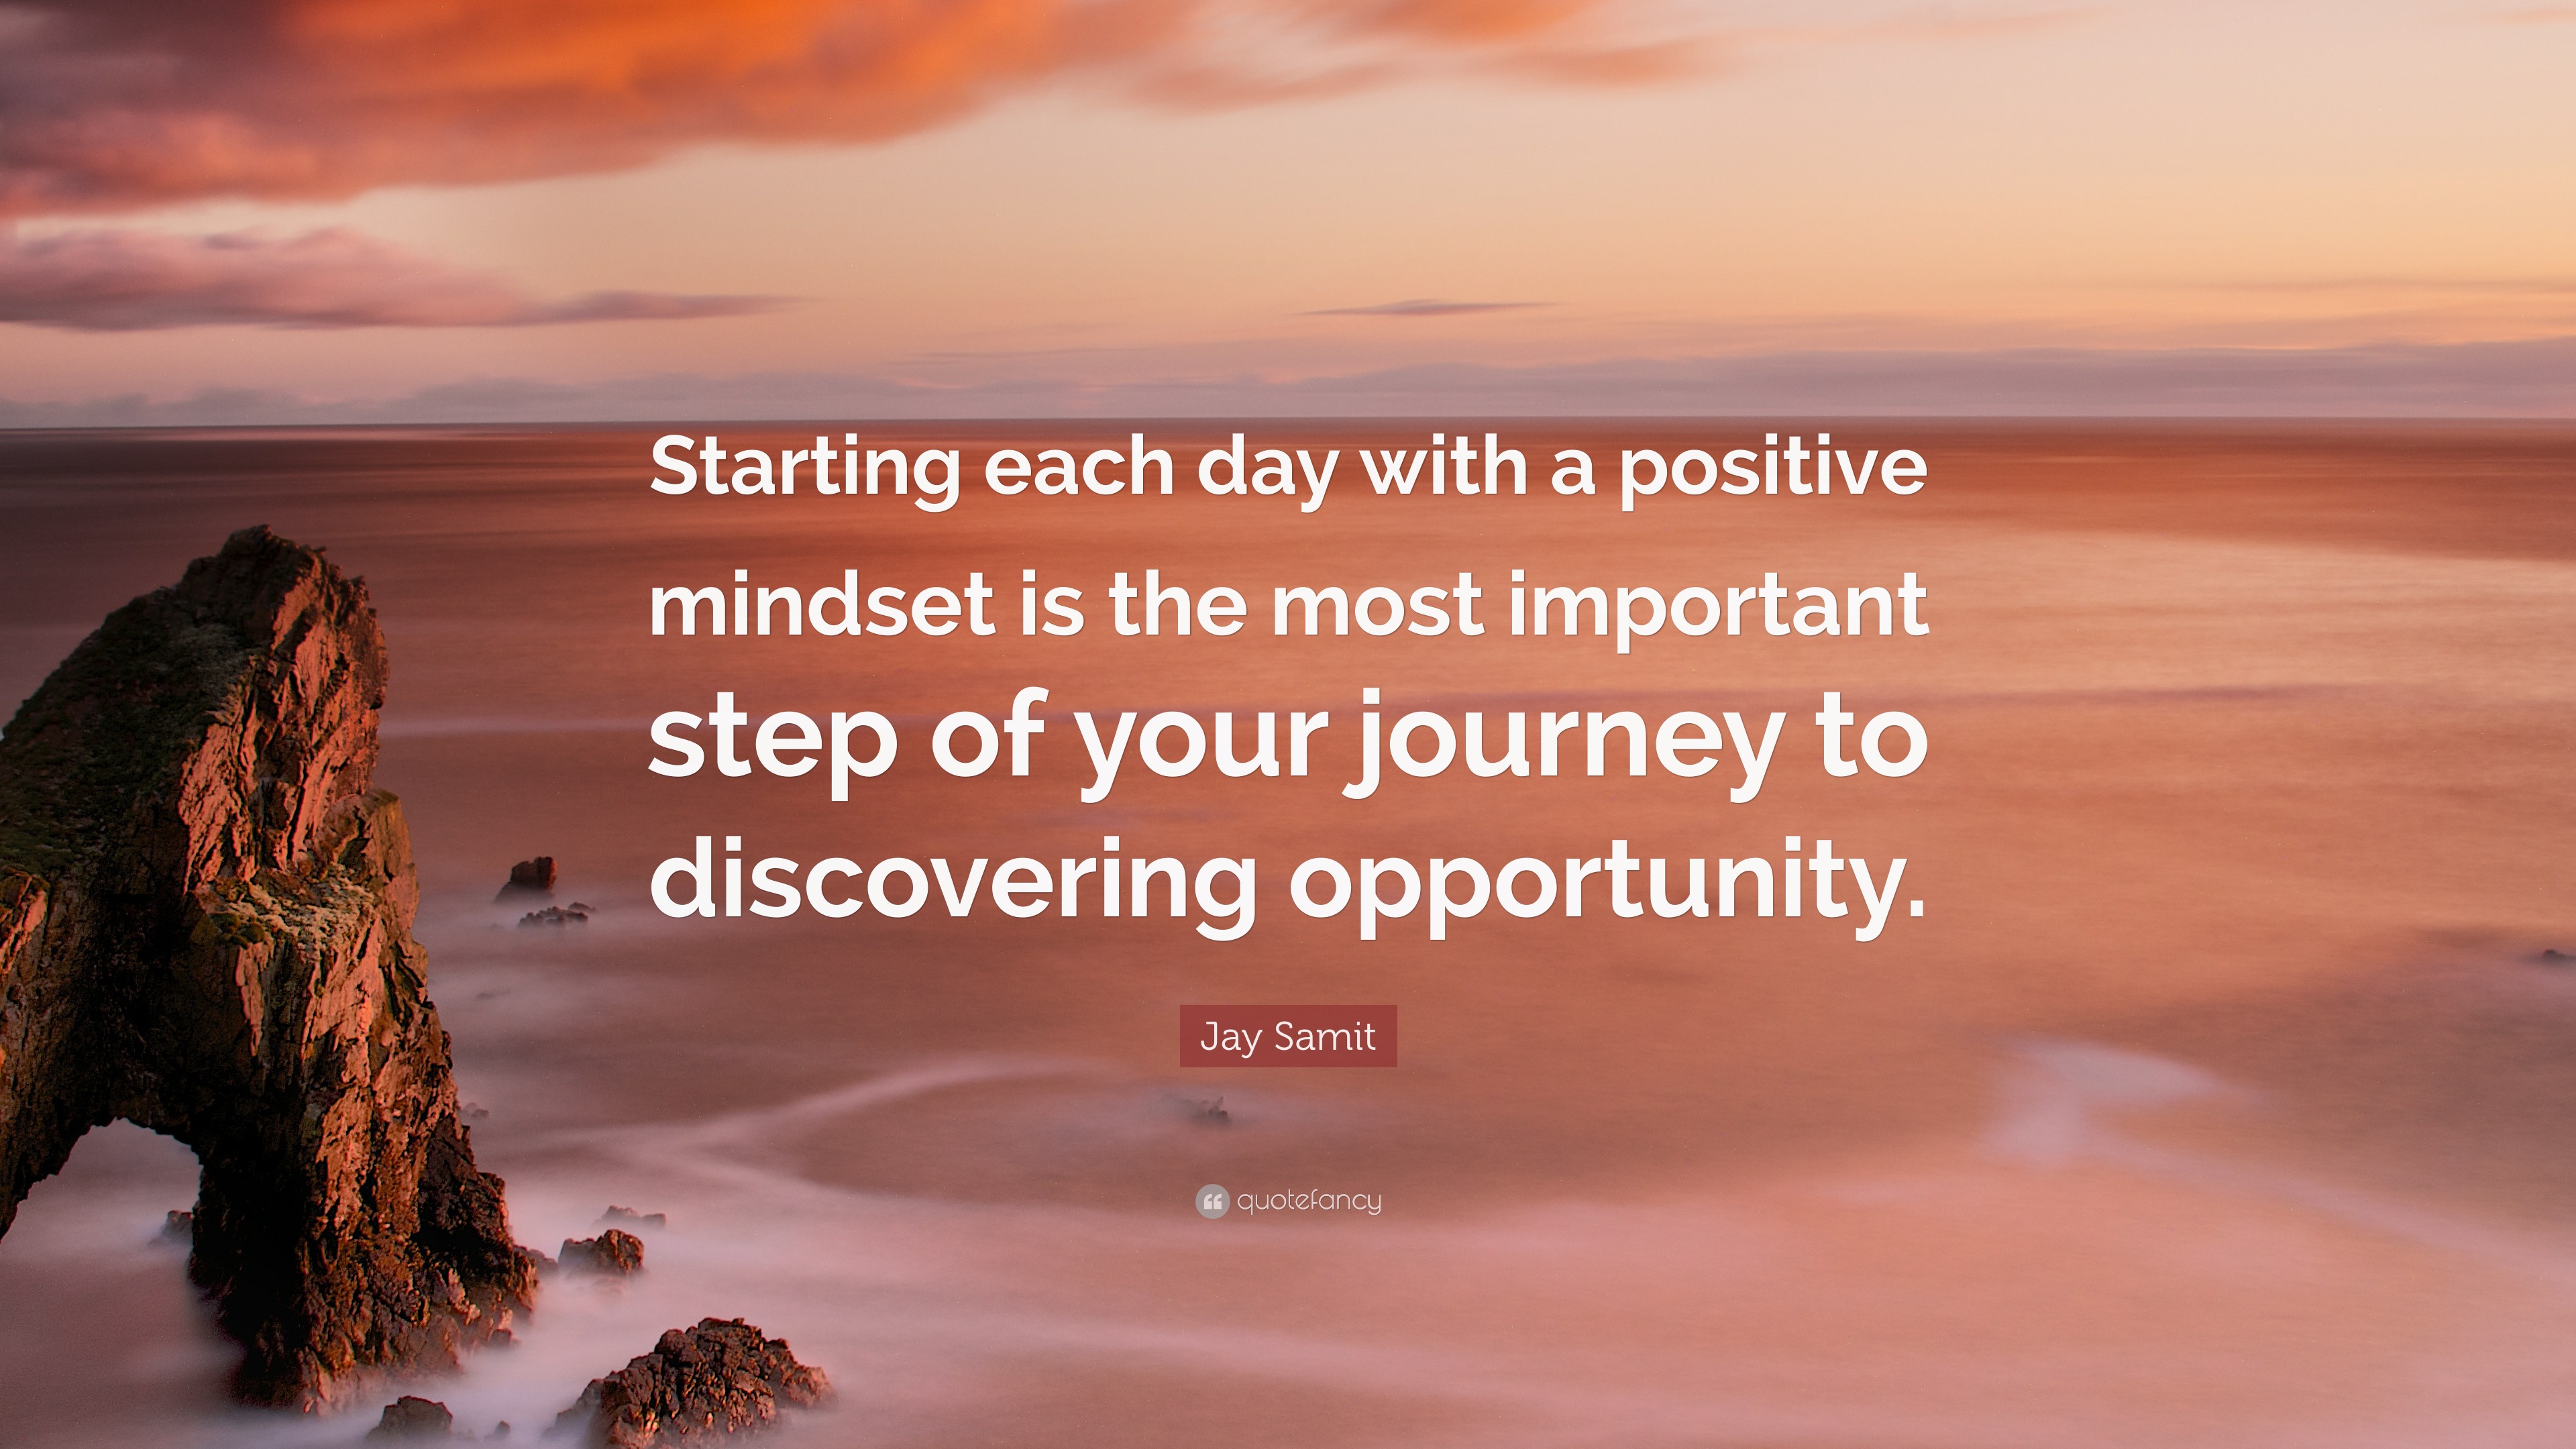 jay-samit-quote-starting-each-day-with-a-positive-mindset-is-the-most